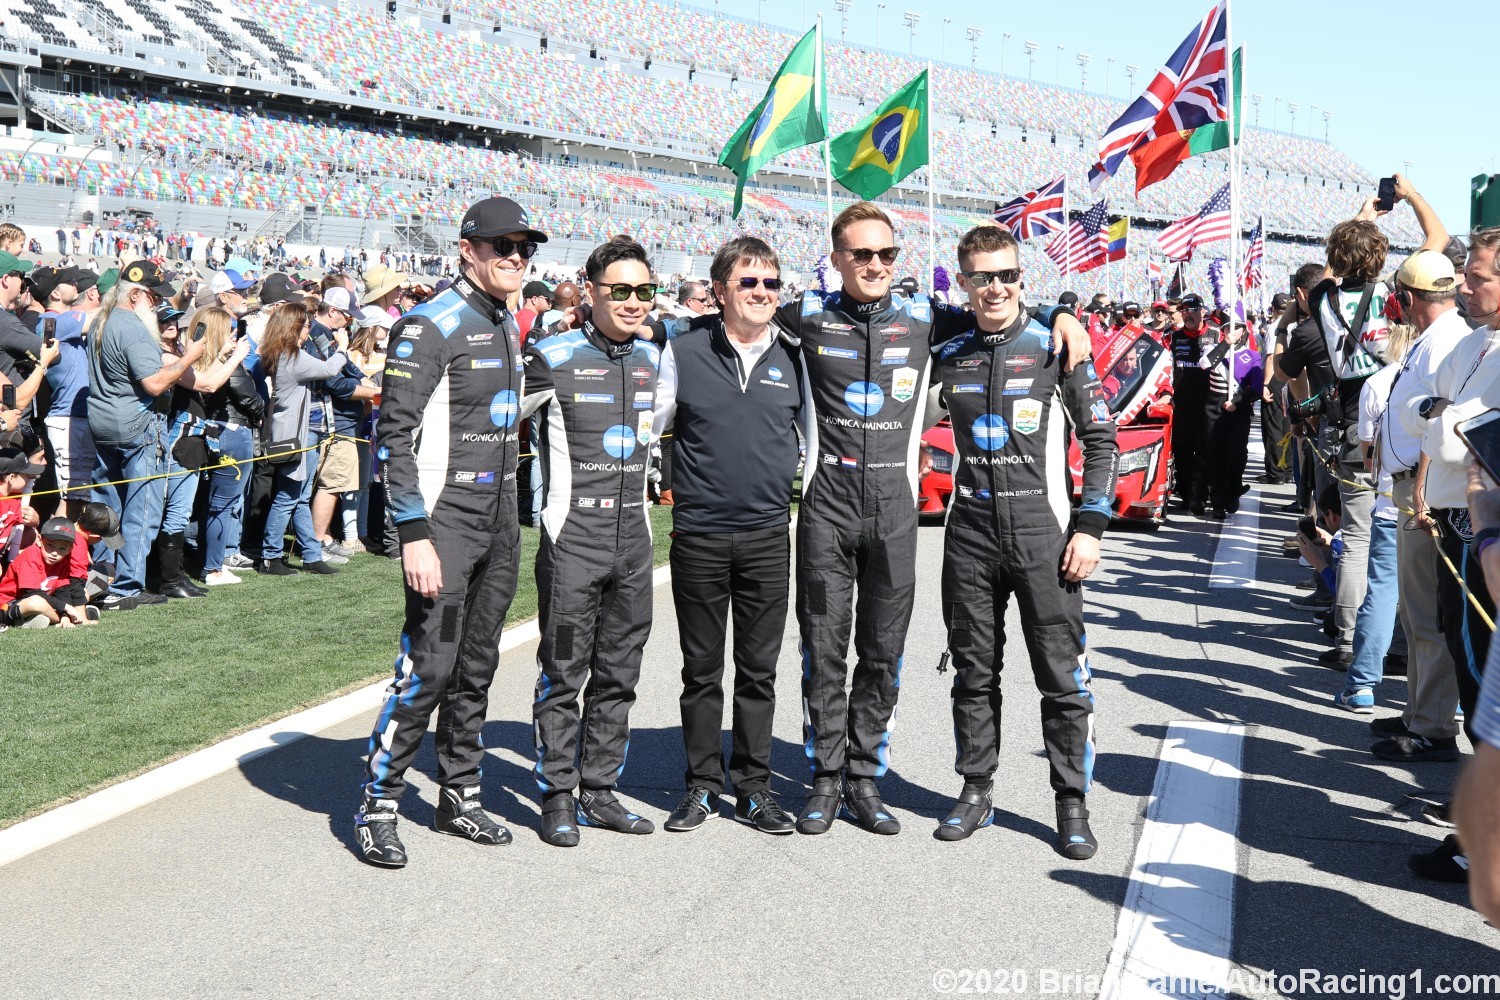 The #10 Cadillac drivers head for victory